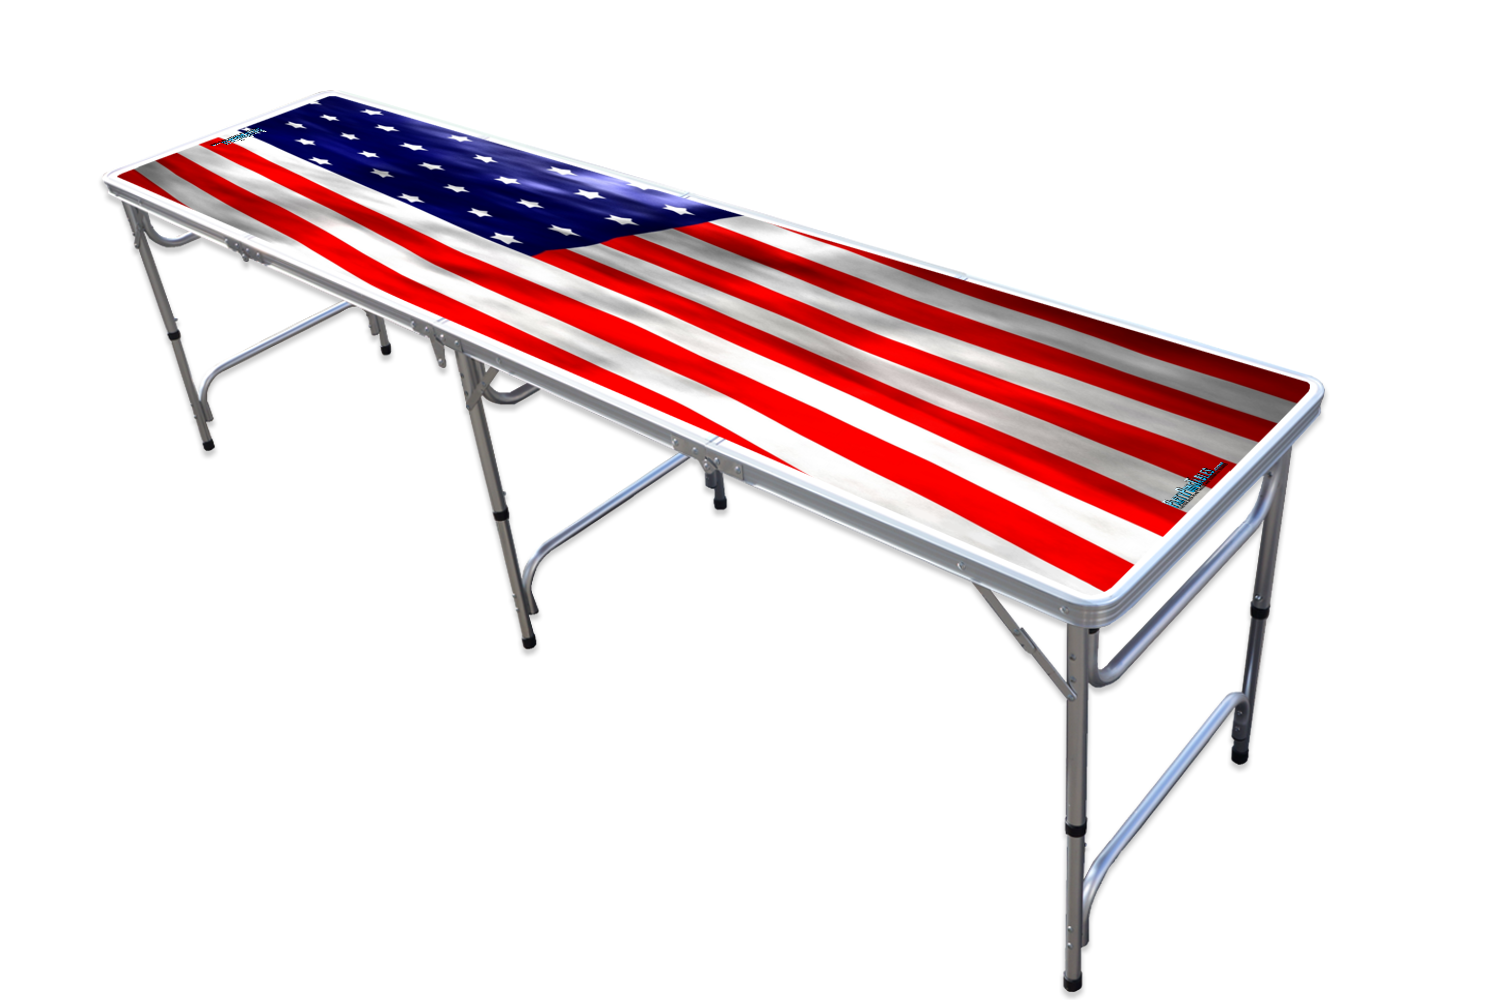 8-Foot Professional Beer Pong Table - America Edition - image 1 of 4